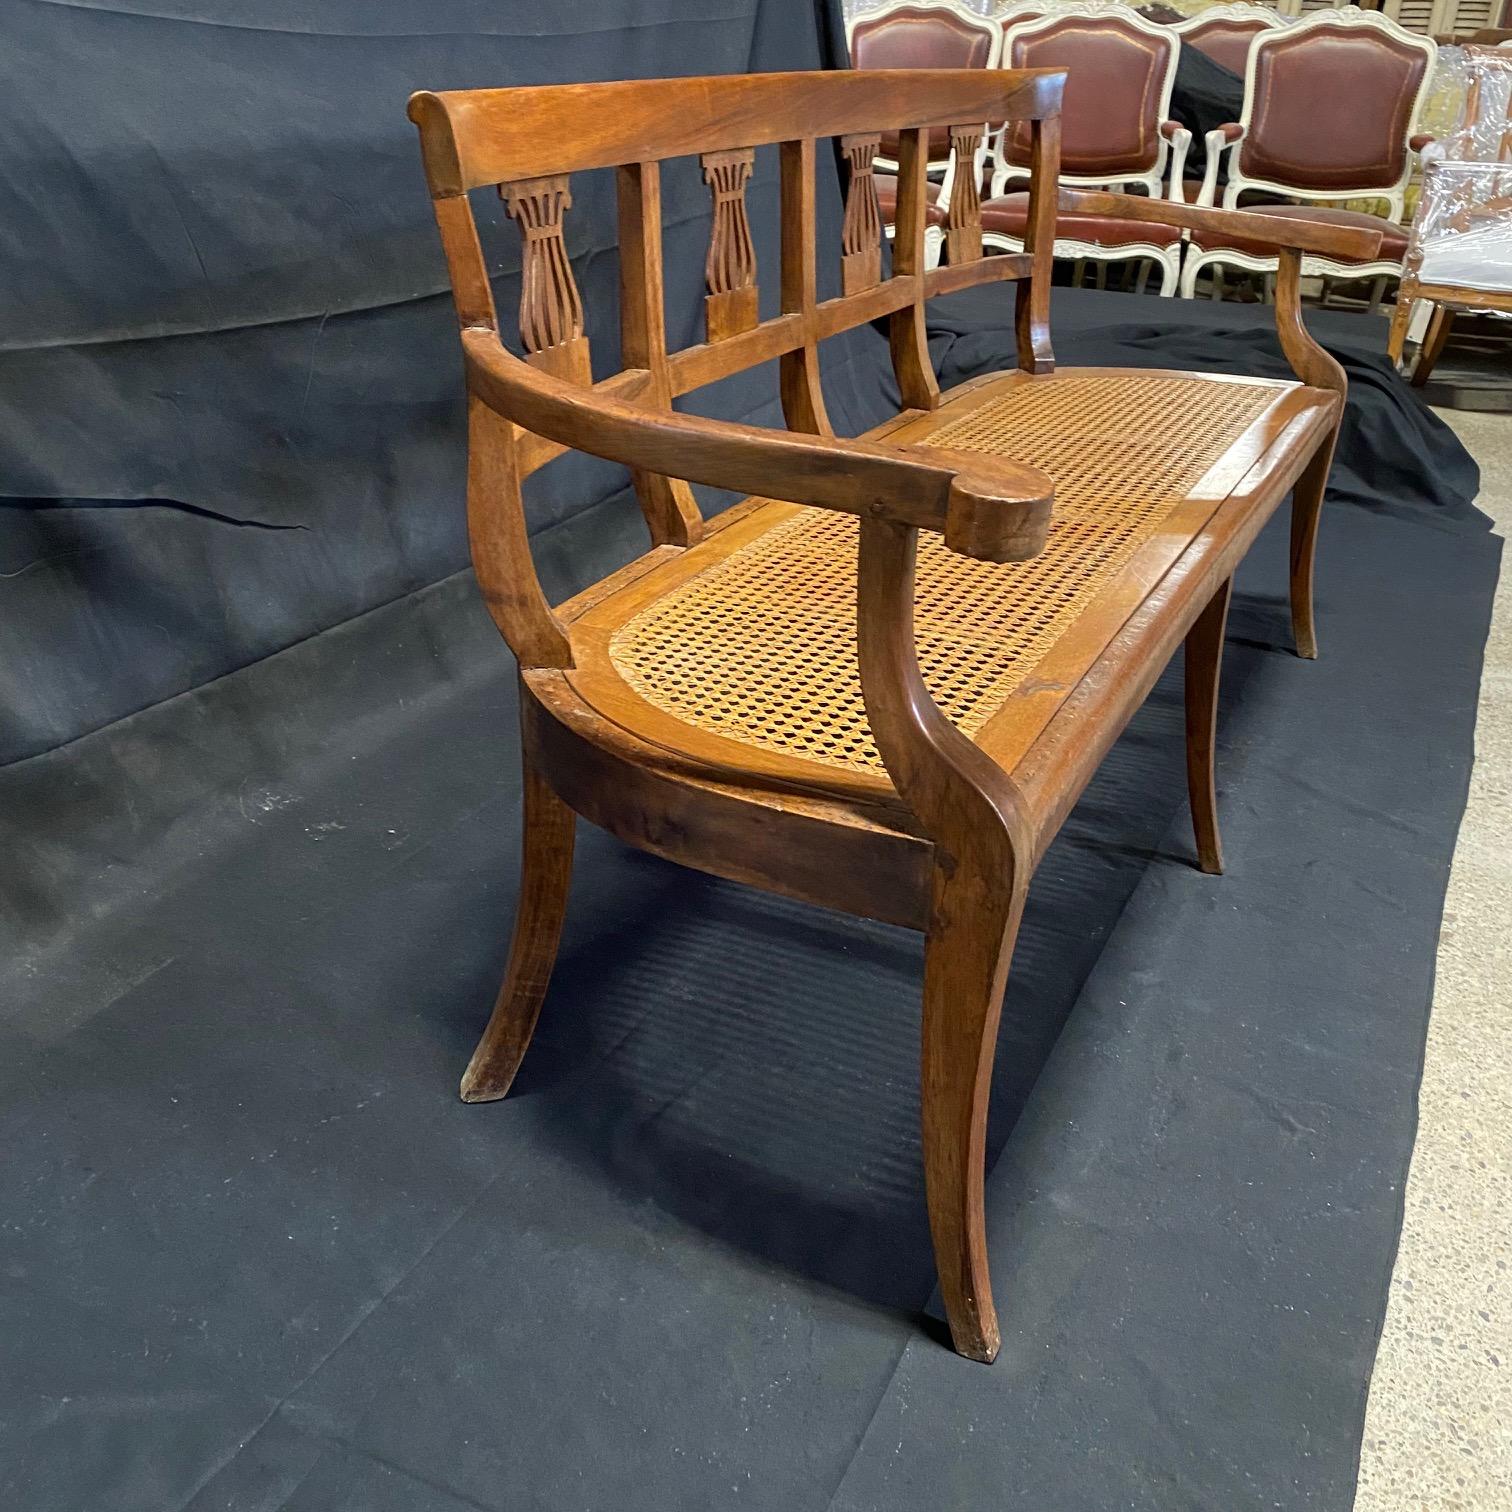 Exquisite mid century Italian neoclassical walnut sofa bench with hand carved back, tapered legs and immaculate caned seat. Lovely carved detail on the back depicting intricate urns, and on the gracefully tapered armrests. This sofa would make a